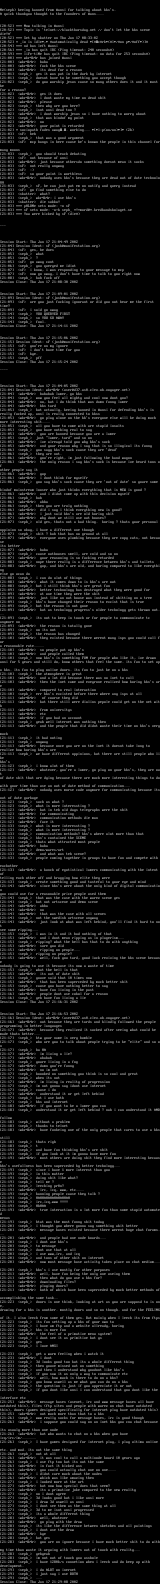 Log from #ansi 2002' by seph/wkr4kr4/sF